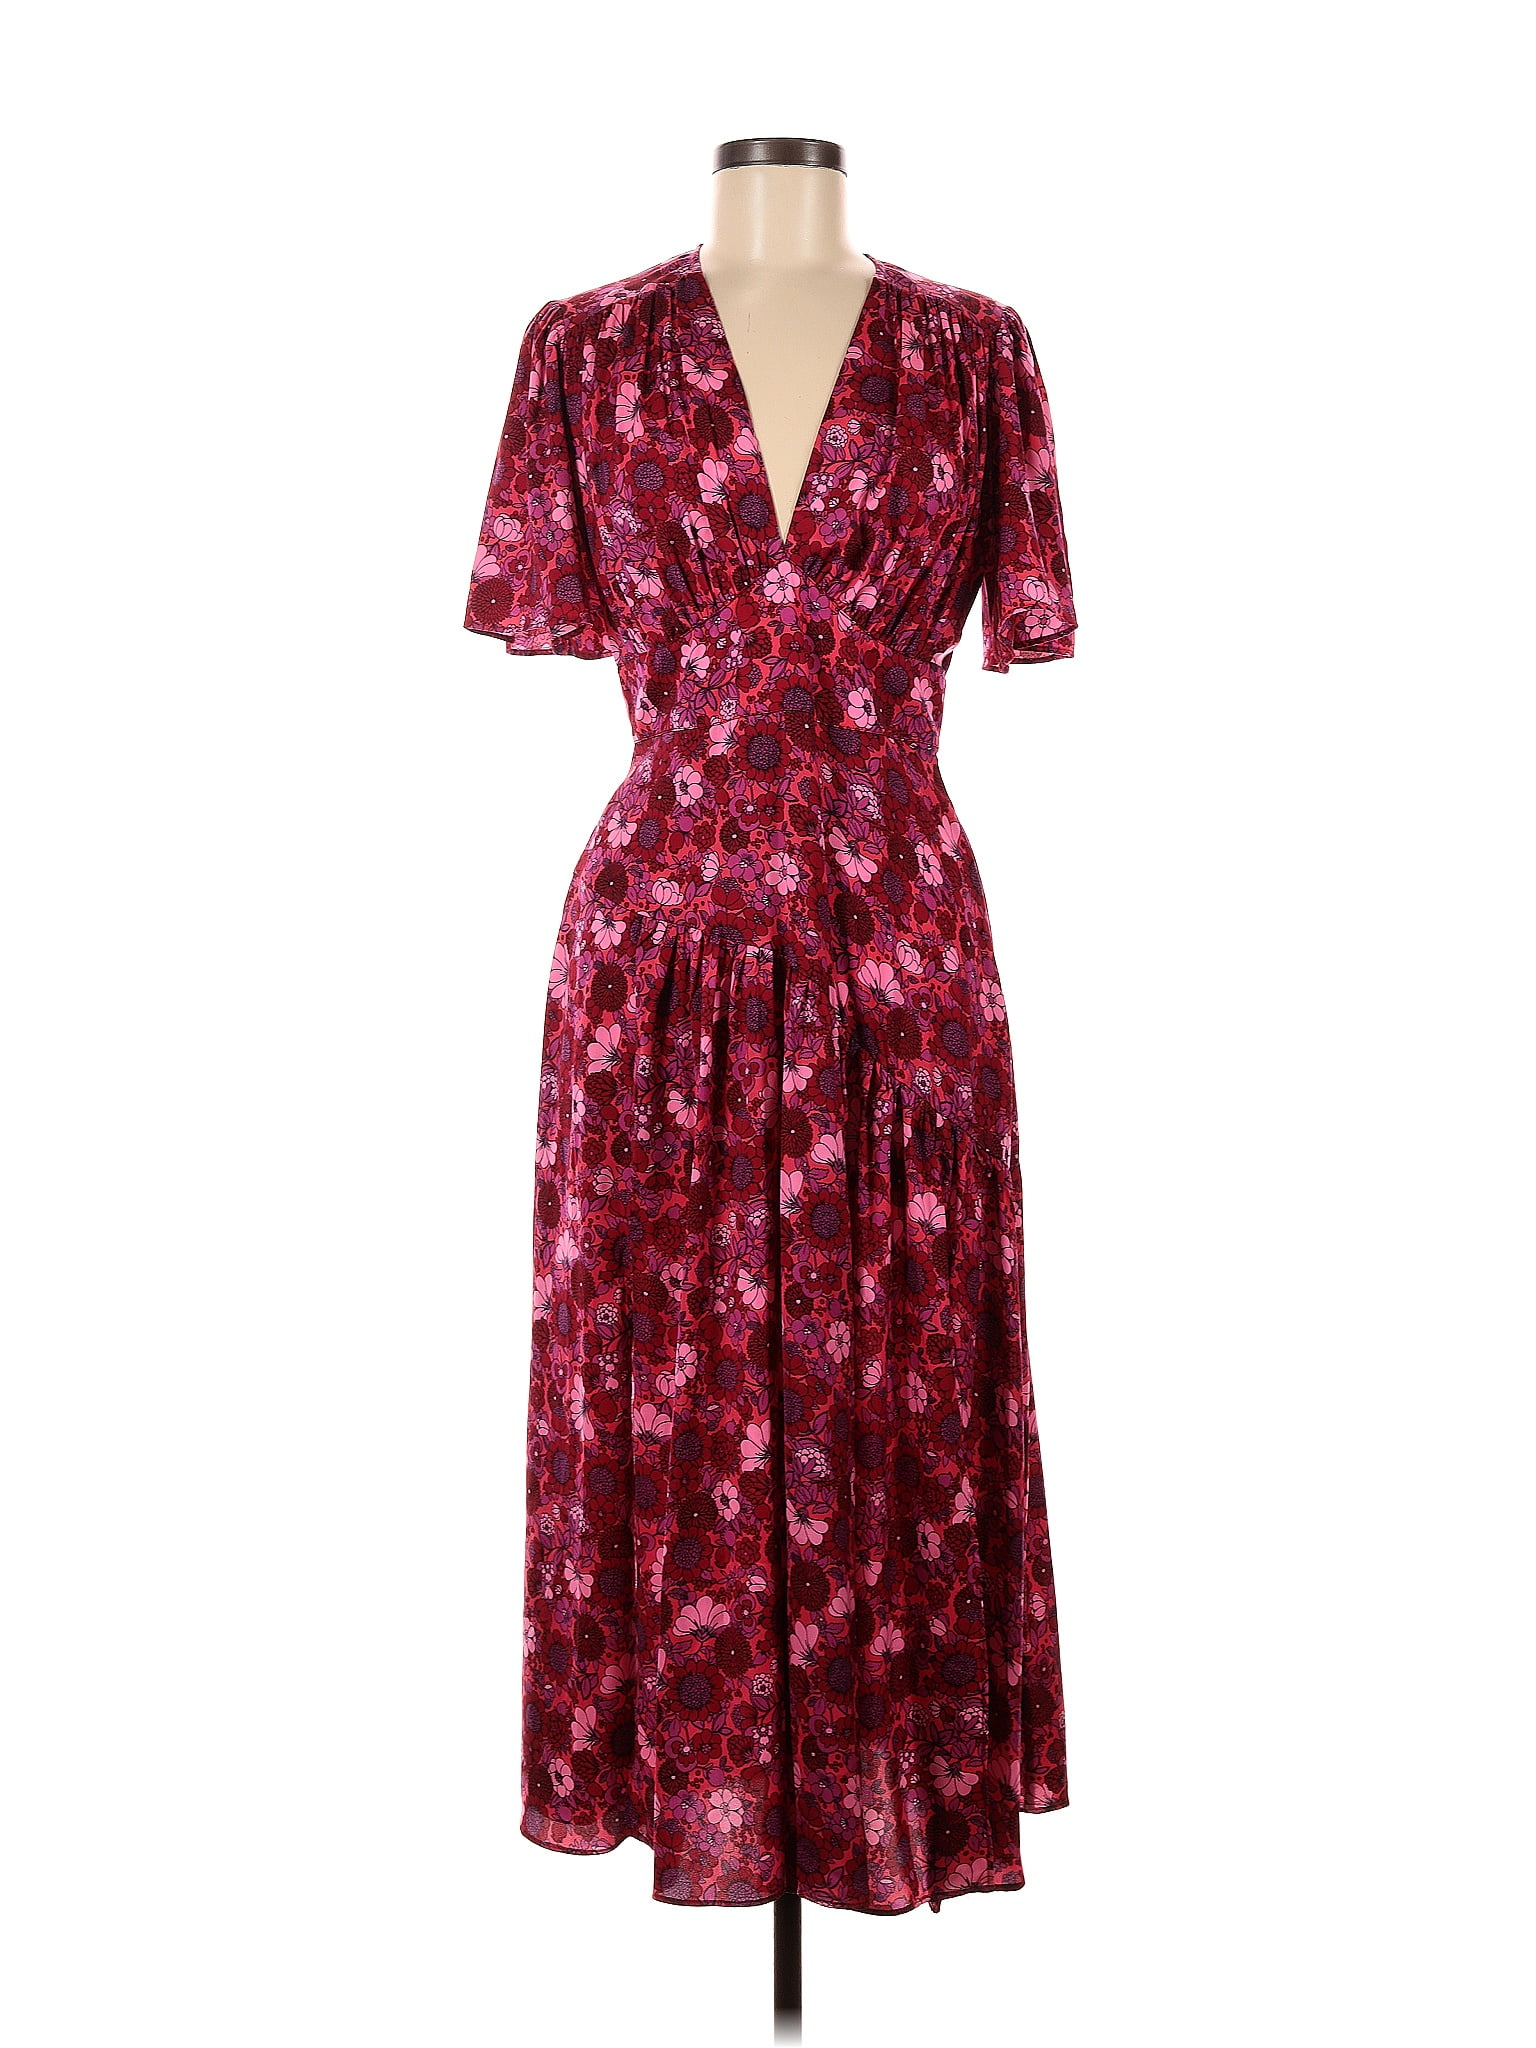 Topshop 100% Polyester Floral Multi Color Burgundy Casual Dress Size 6 ...